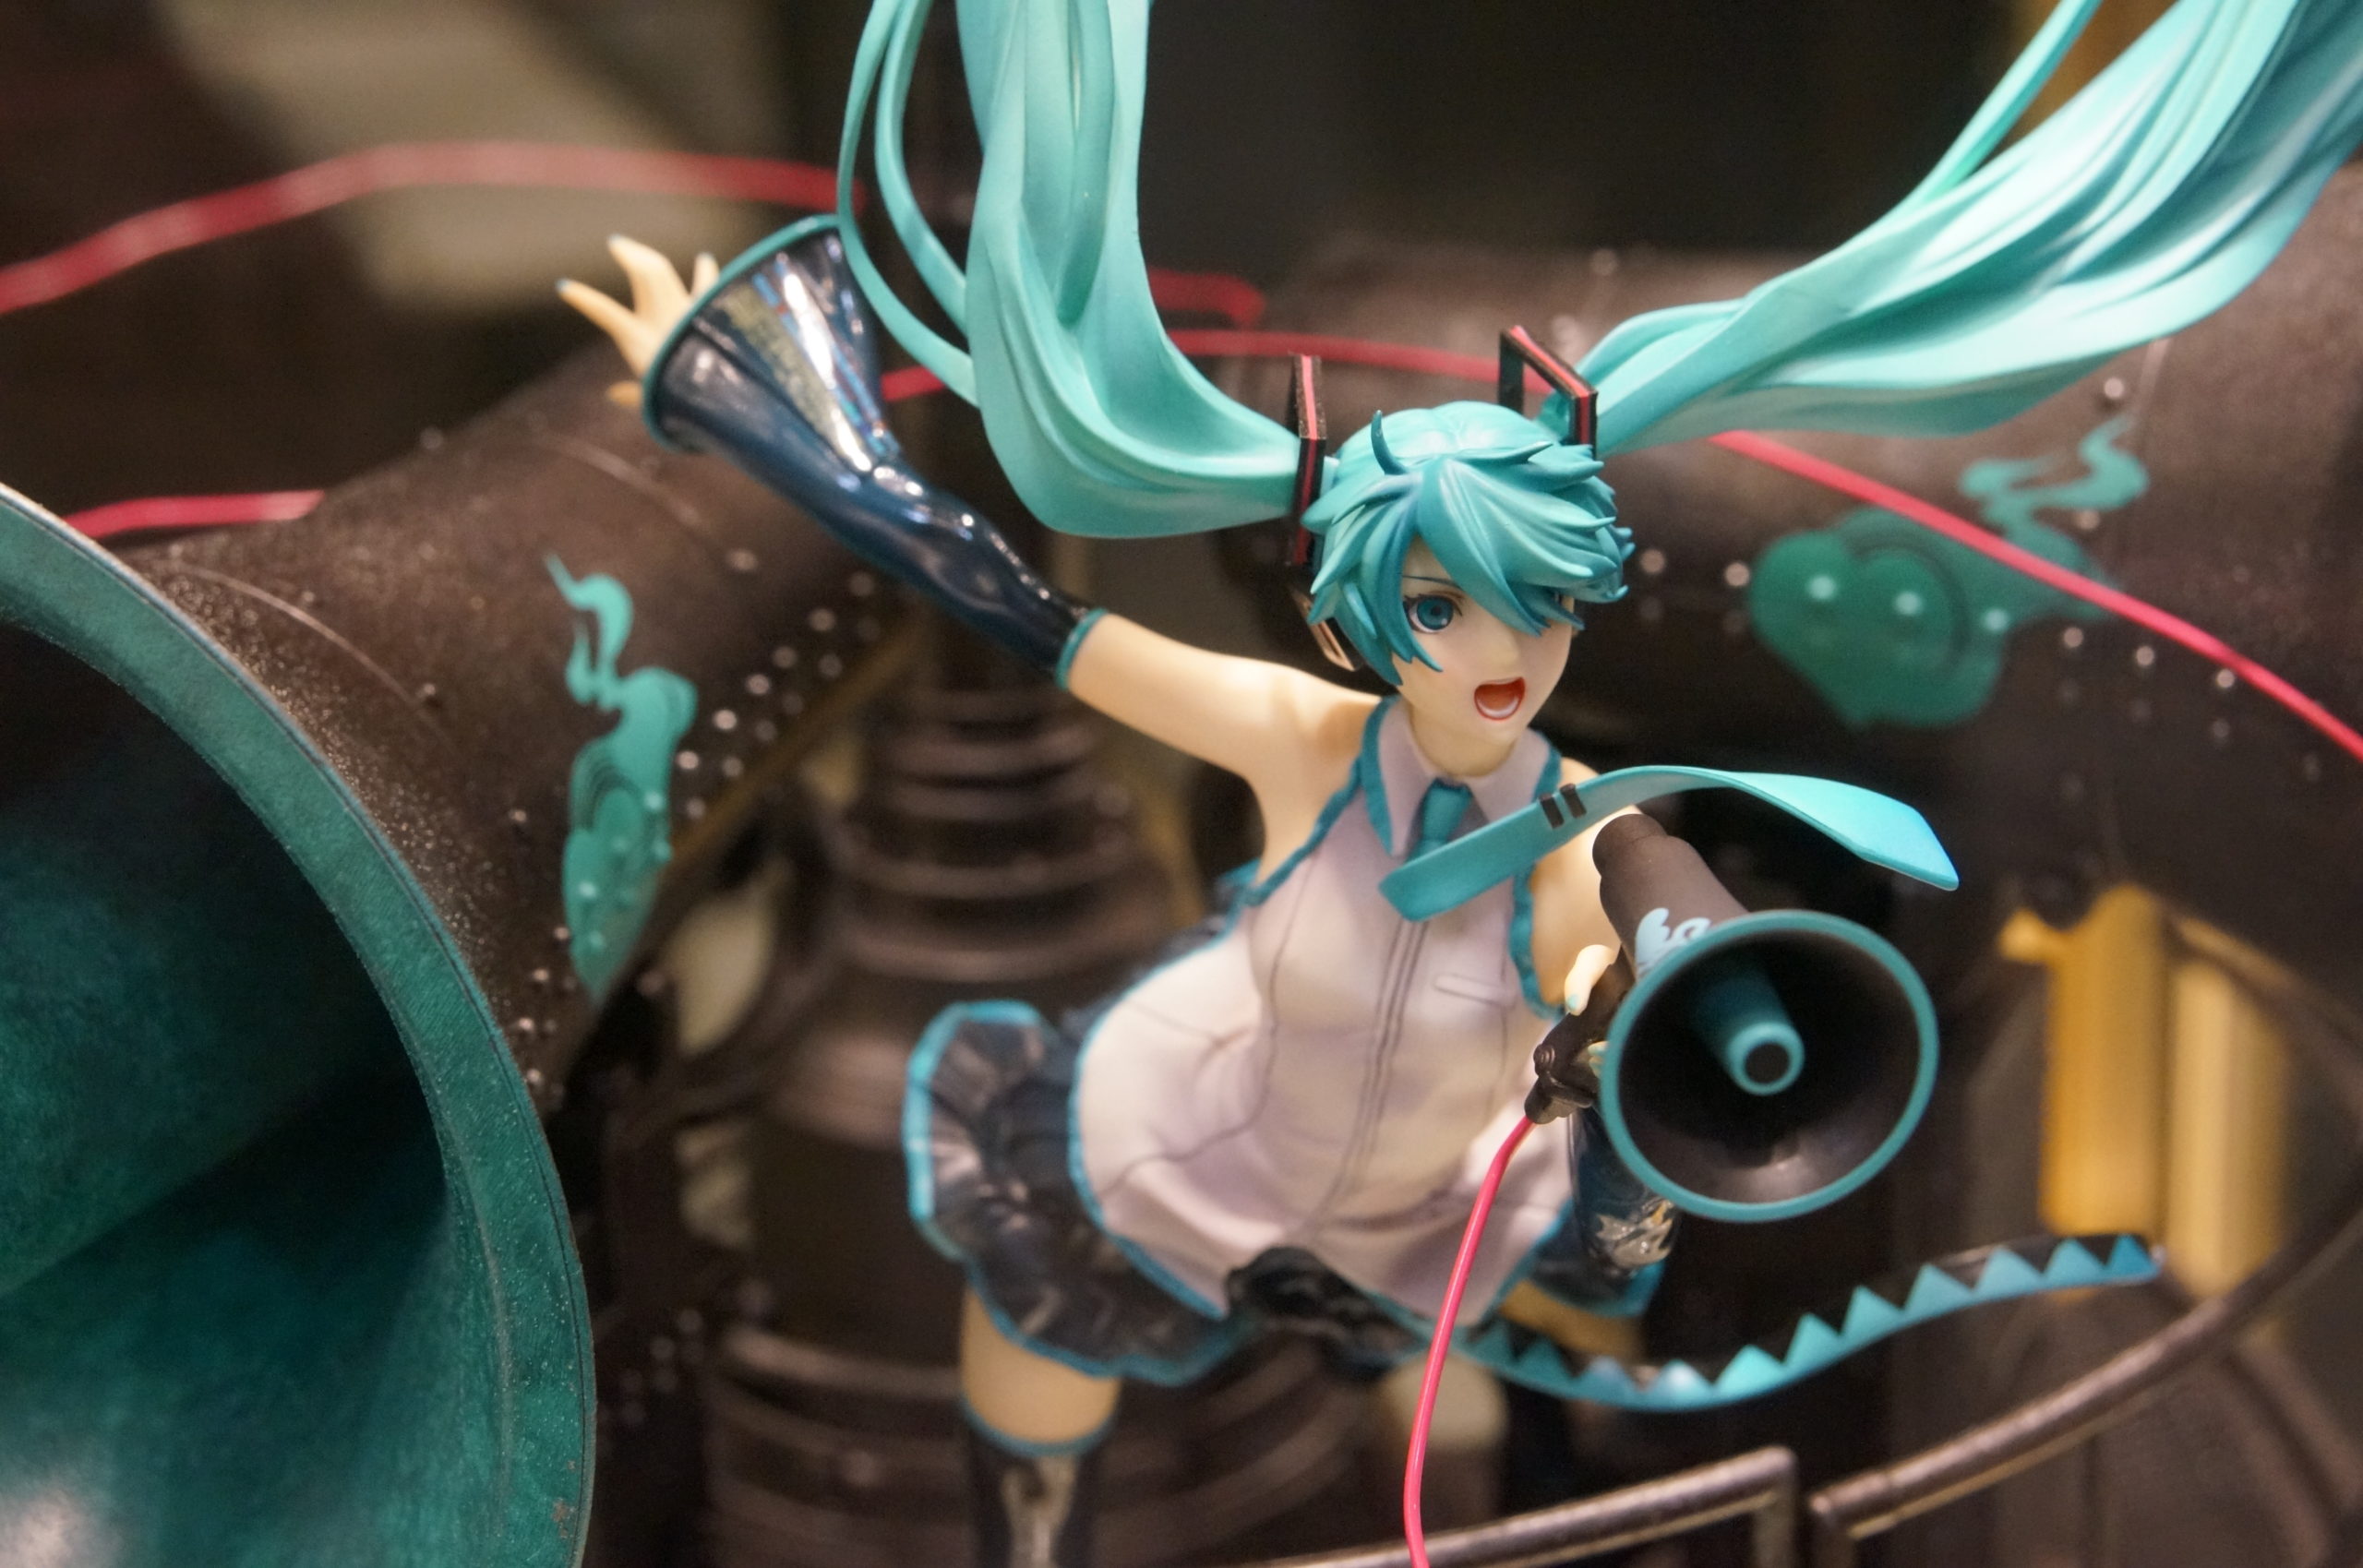 Cool Anime Toys We Saw At Toy Fair